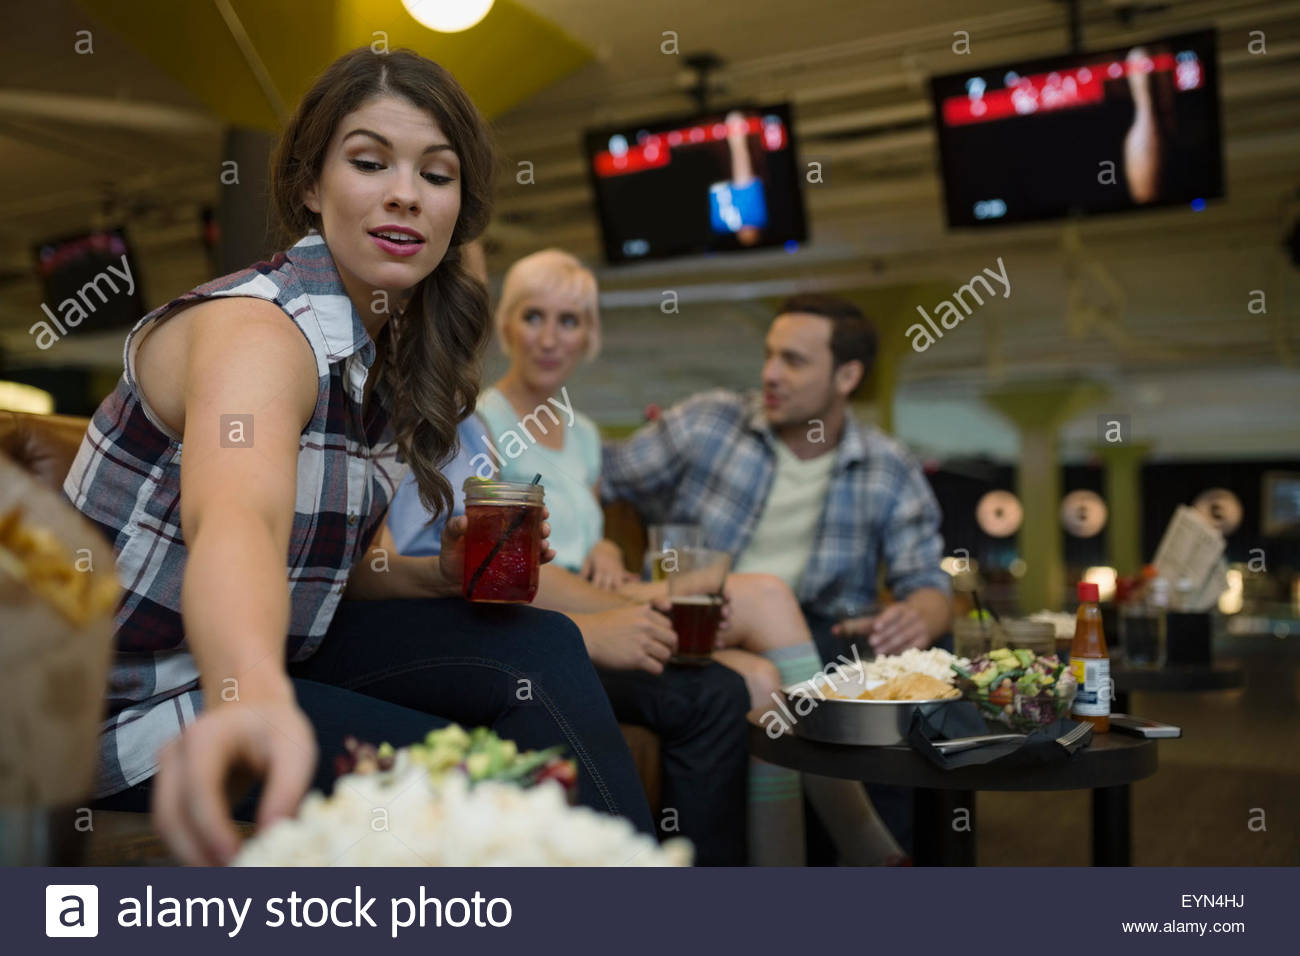 Friends eating and drinking at bowling alley Stock Photo